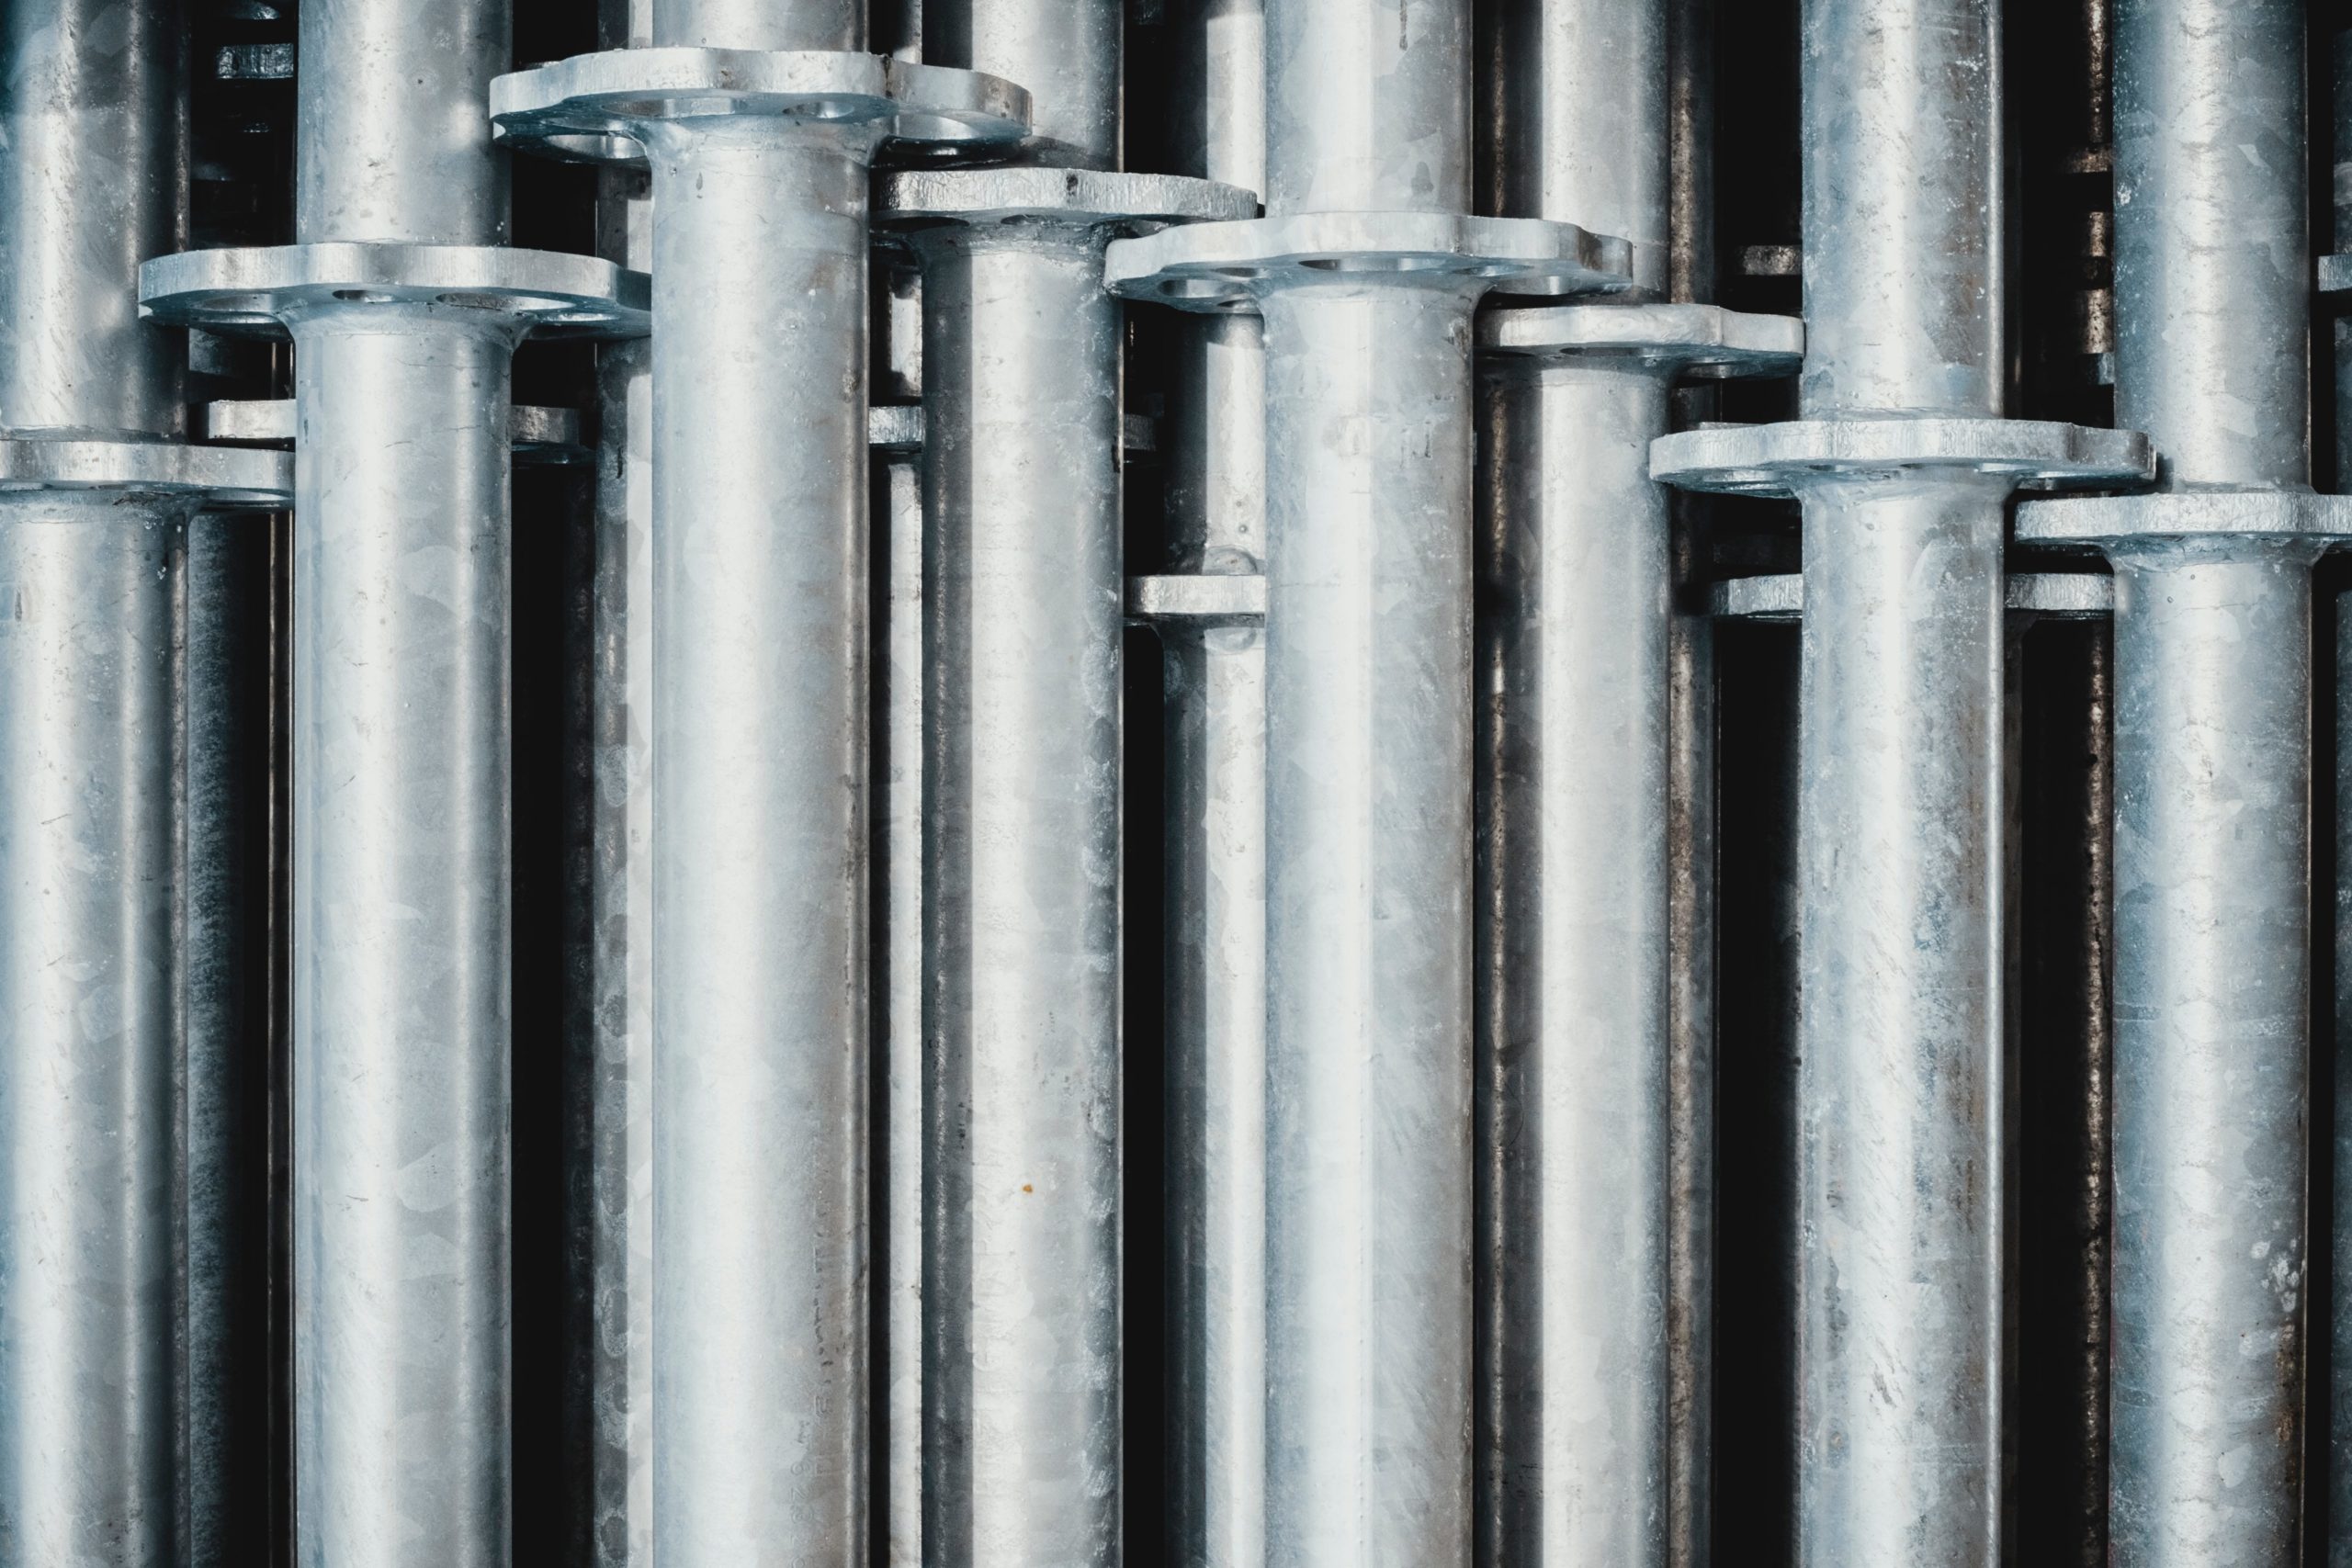 A row of pipes made of recycled metal.